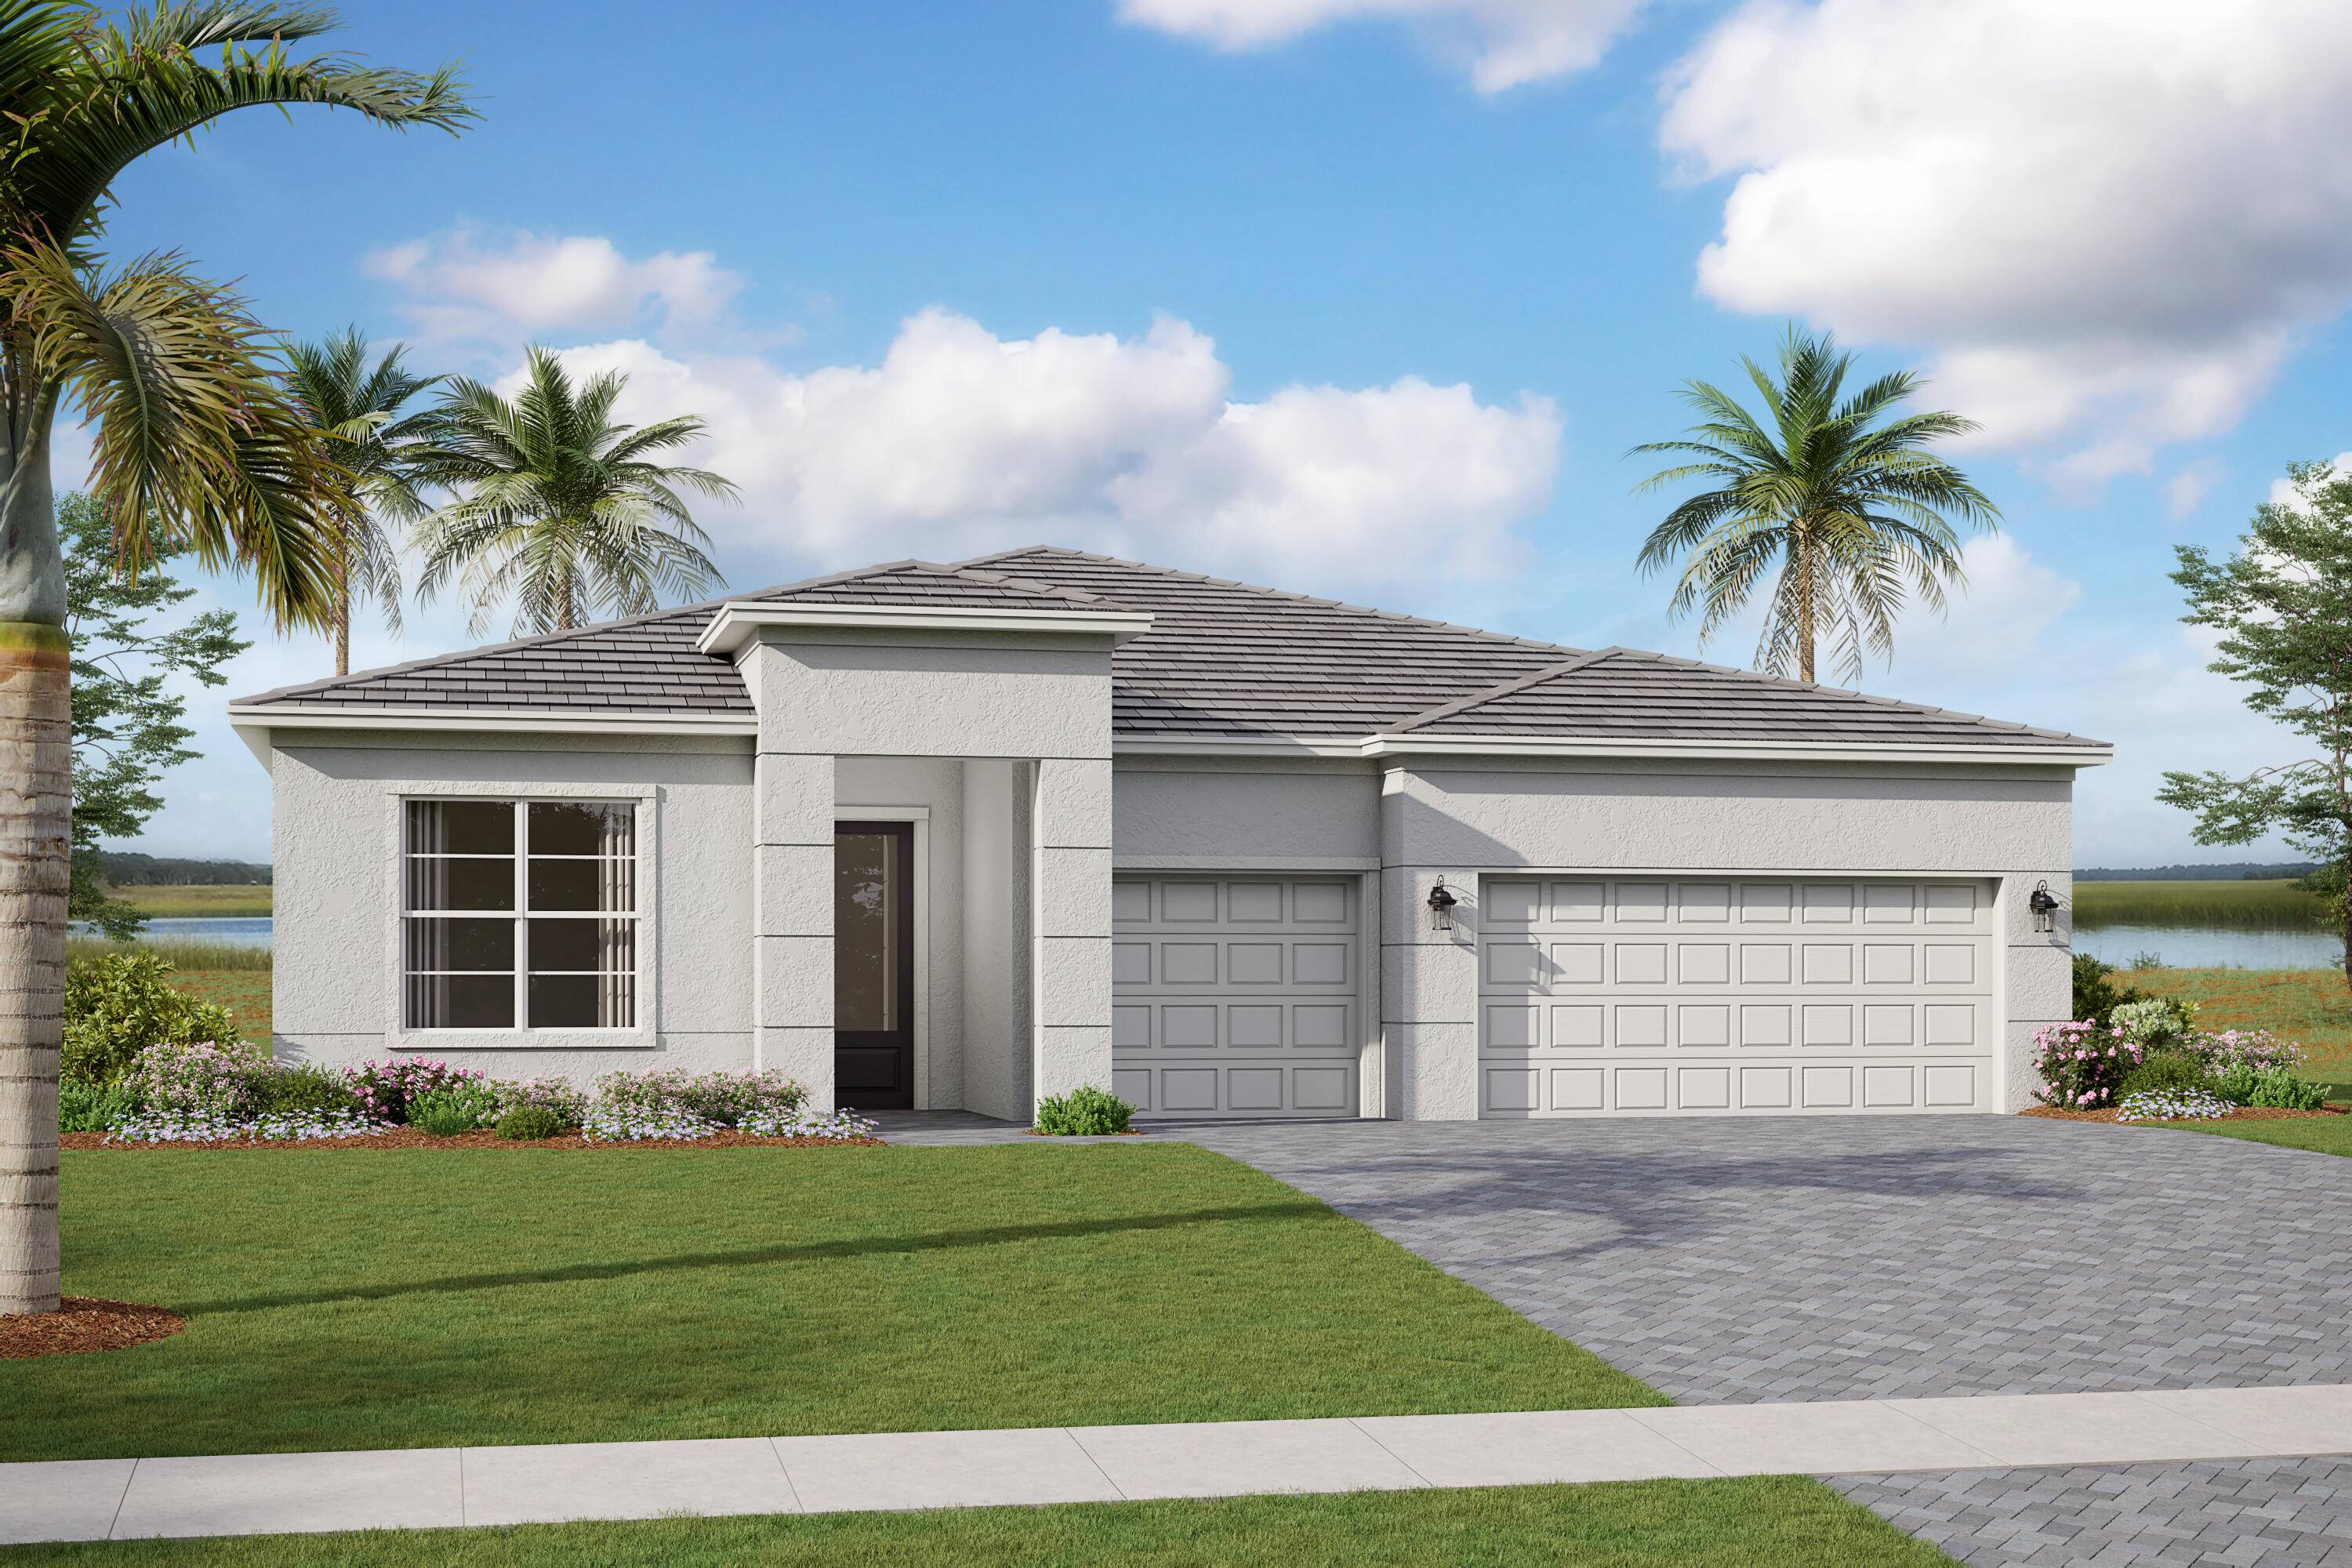 The Harbor floorplan has expansive living spaces including 3 bed and baths, a dining and great room for entertaining, a beautiful gourmet kitchen, a study with French doors and a ...